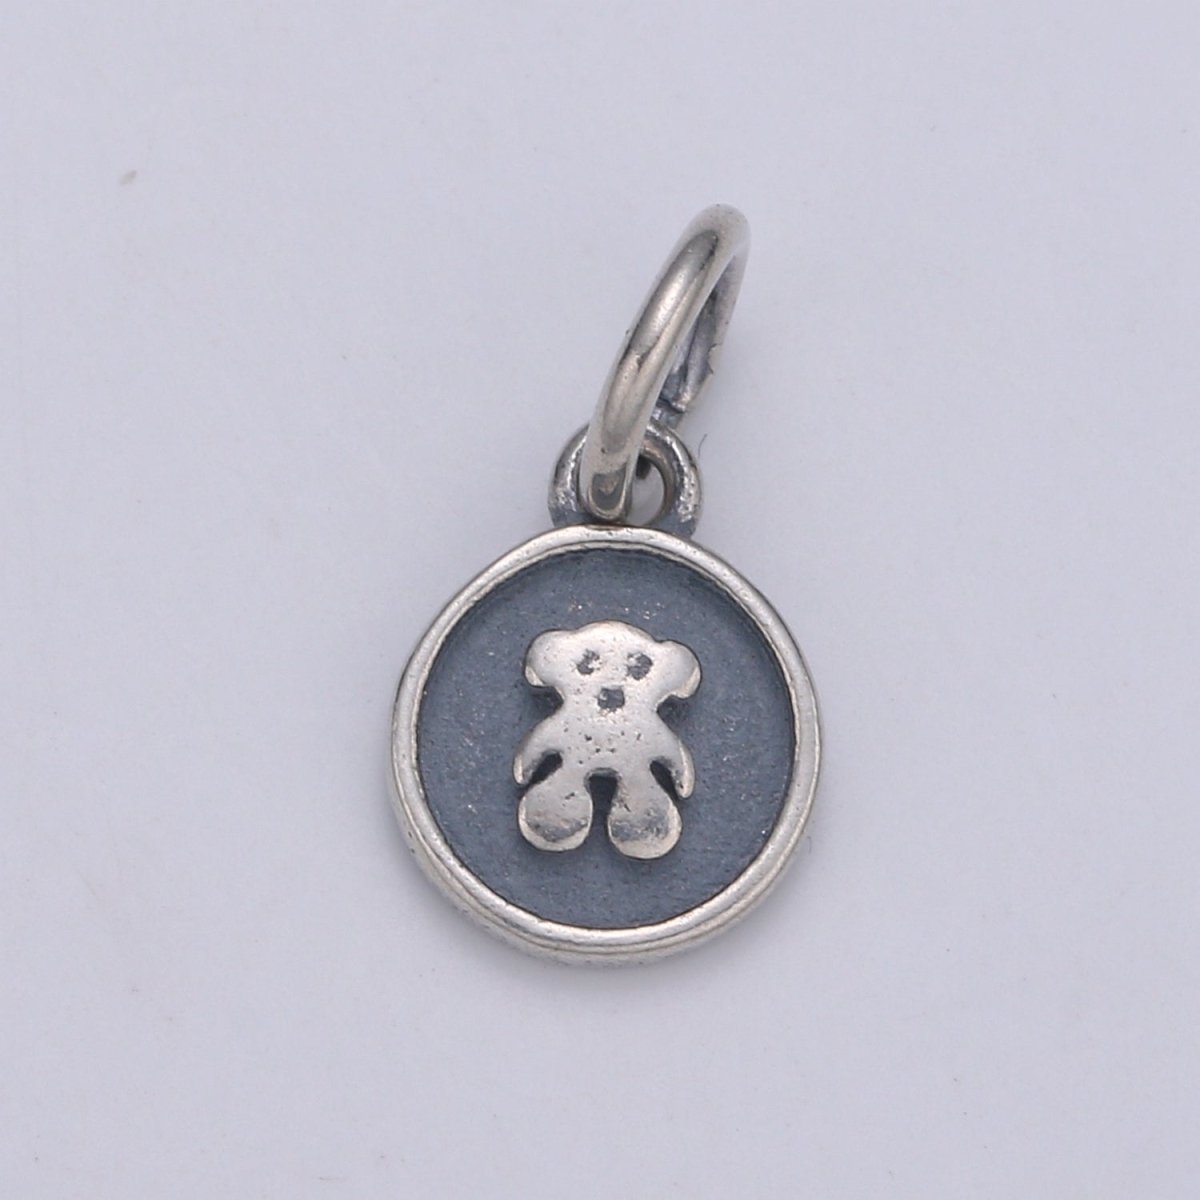 925 Sterling Silver Teddy Bear Charm, Antique Silver Bear Charm Circle Round Disc Charm for Necklace Bracelet Earring, Cute Charm SL-153 - DLUXCA